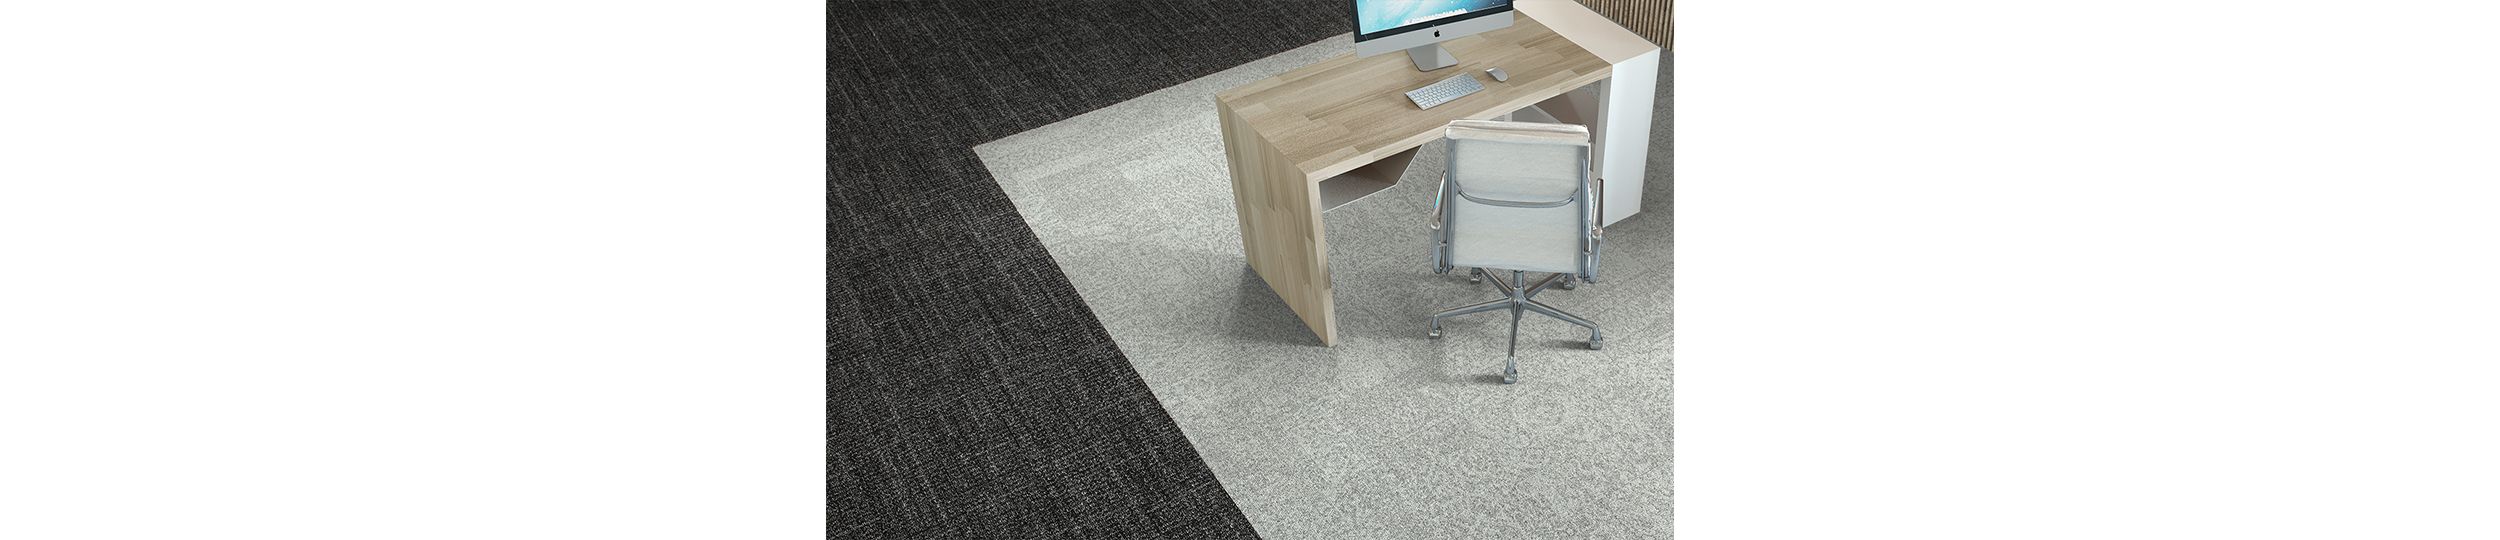 Interface Open Air 405 carpet tile in overhead view with small wooden workstation numéro d’image 5